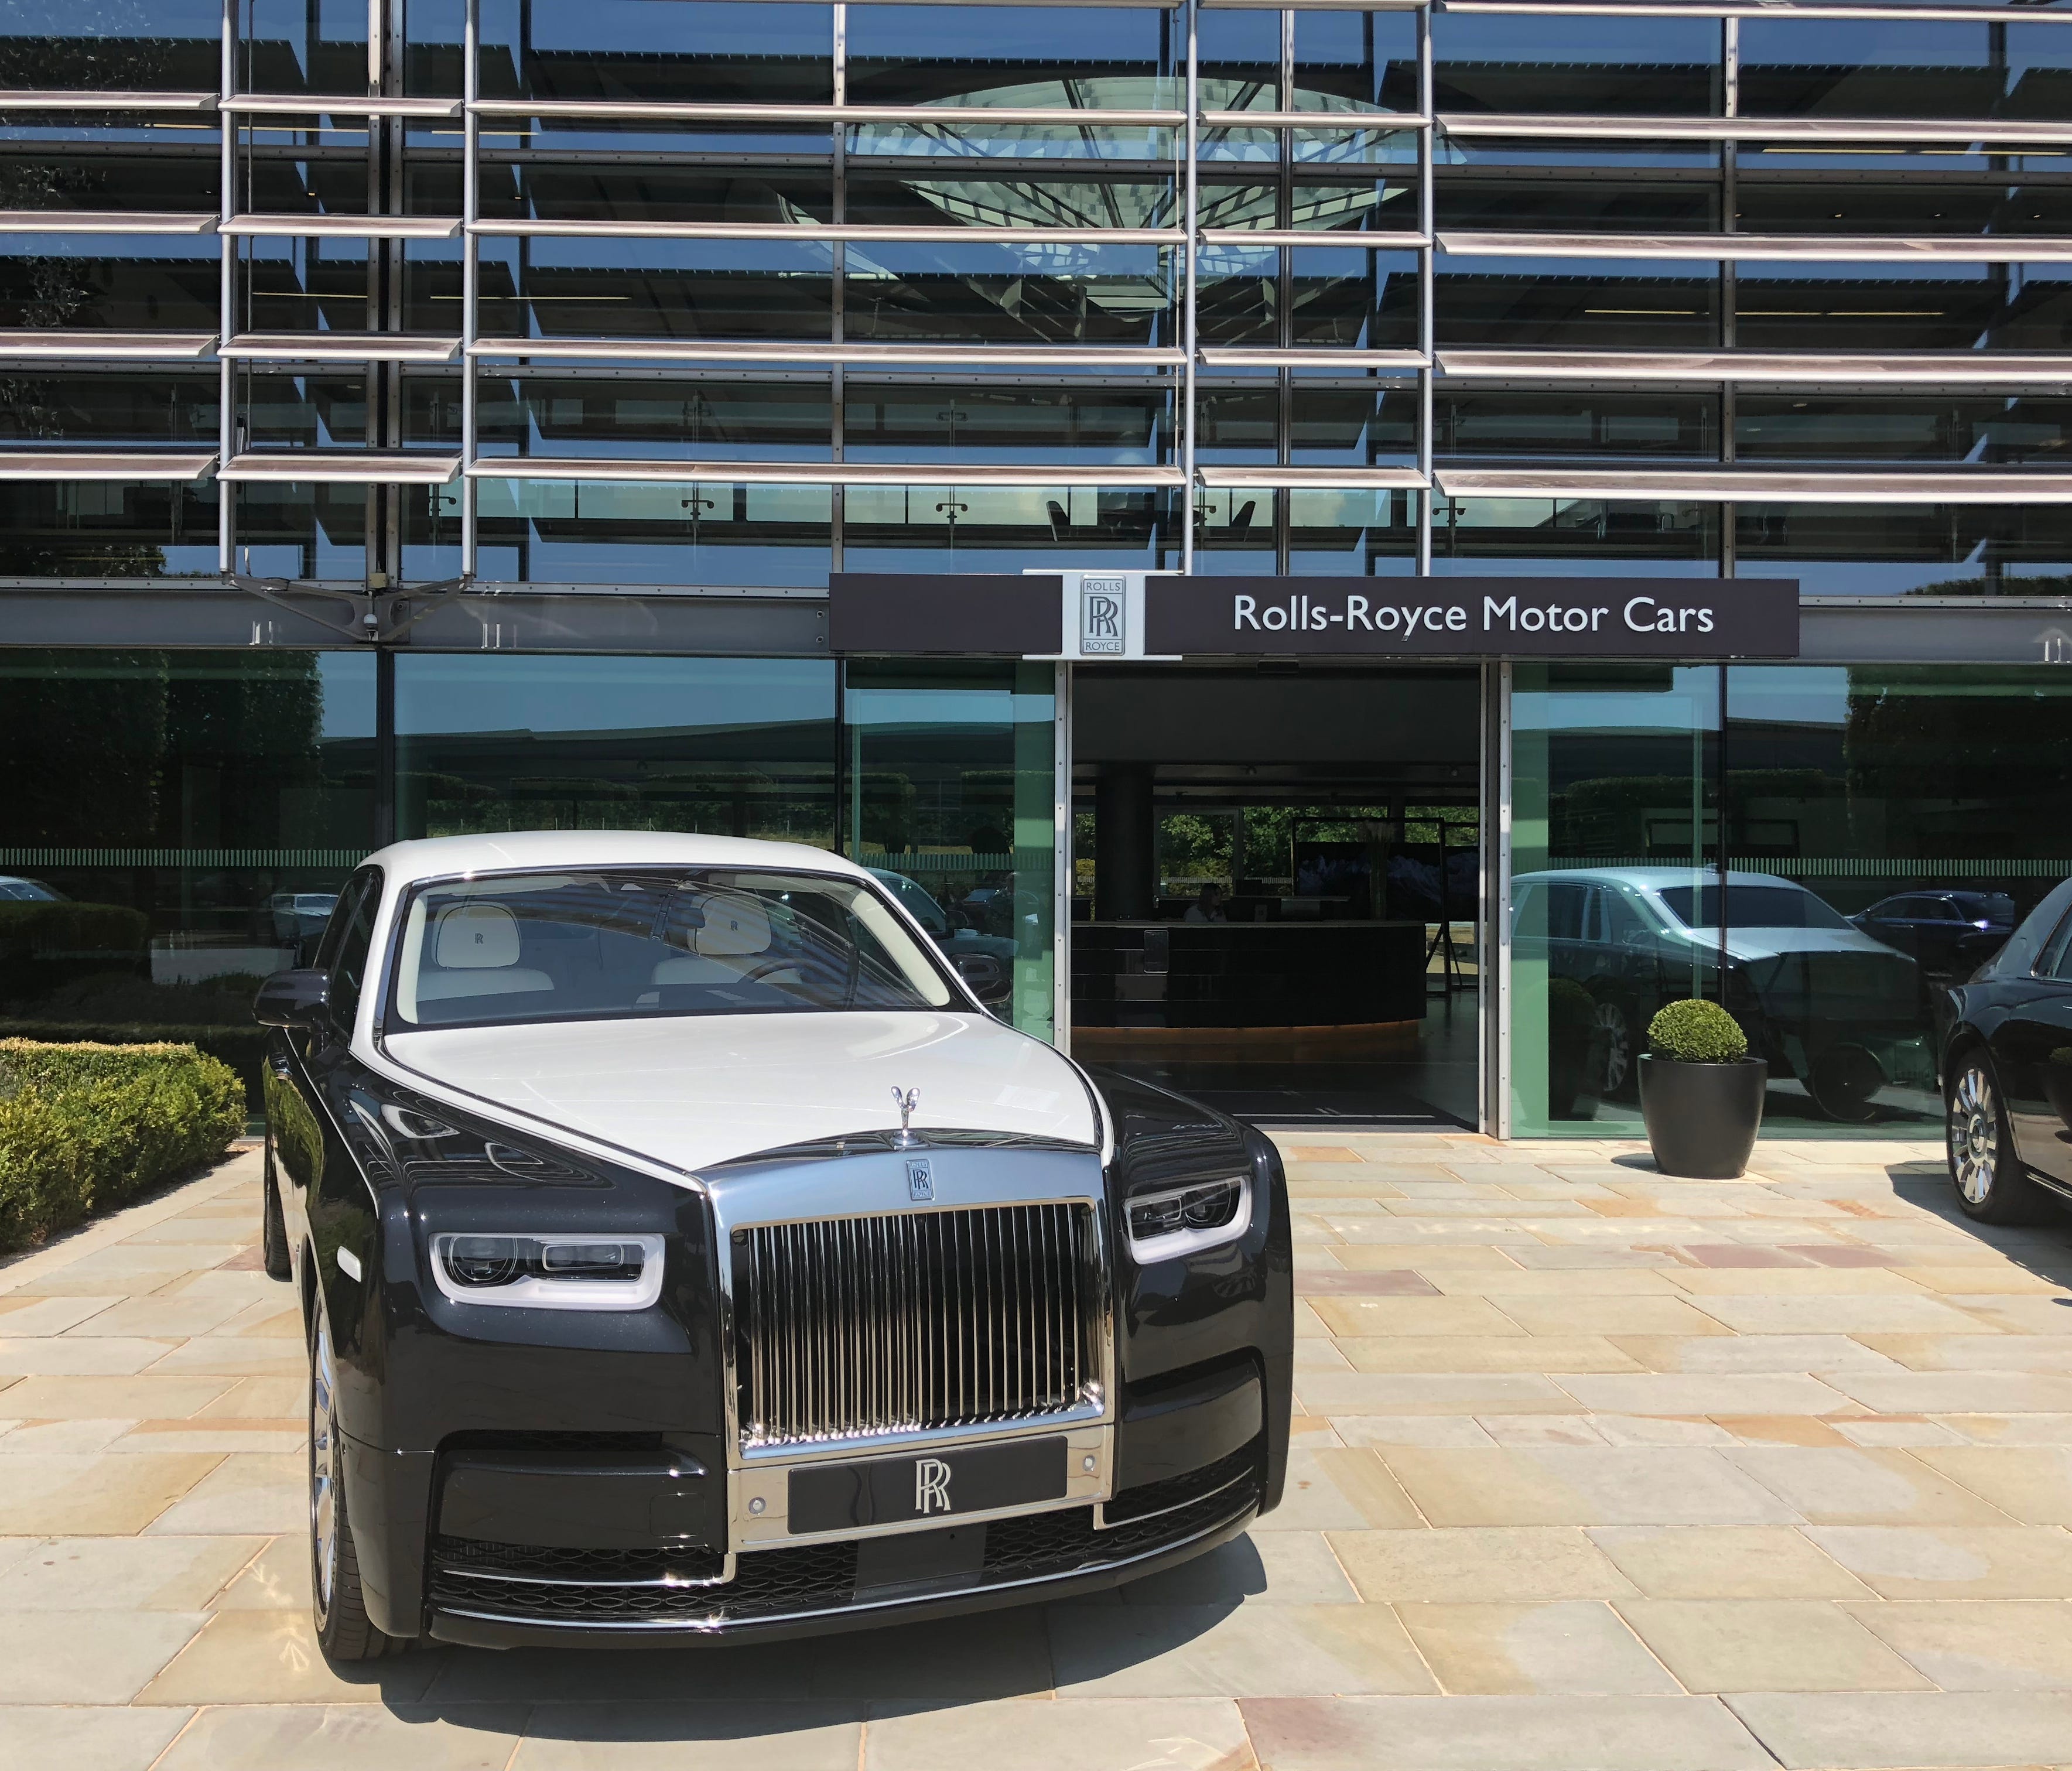 The Rolls-Royce factory in Goodwood, England.